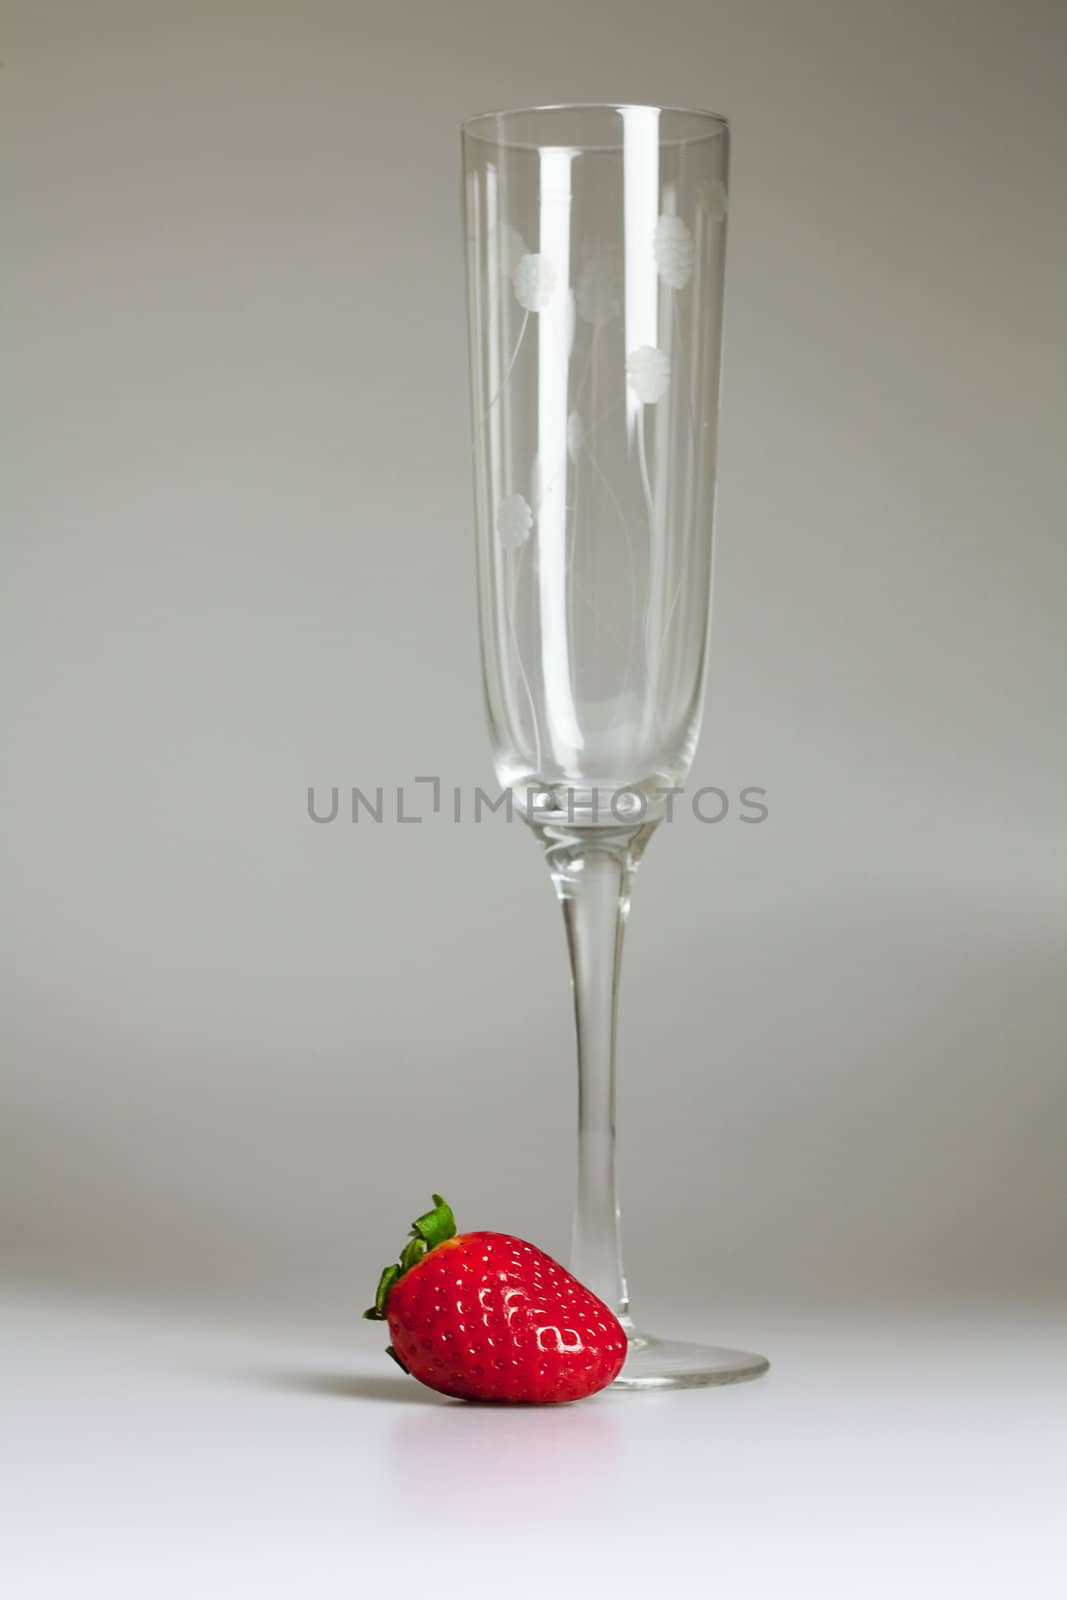  a glass and juicy strawberries